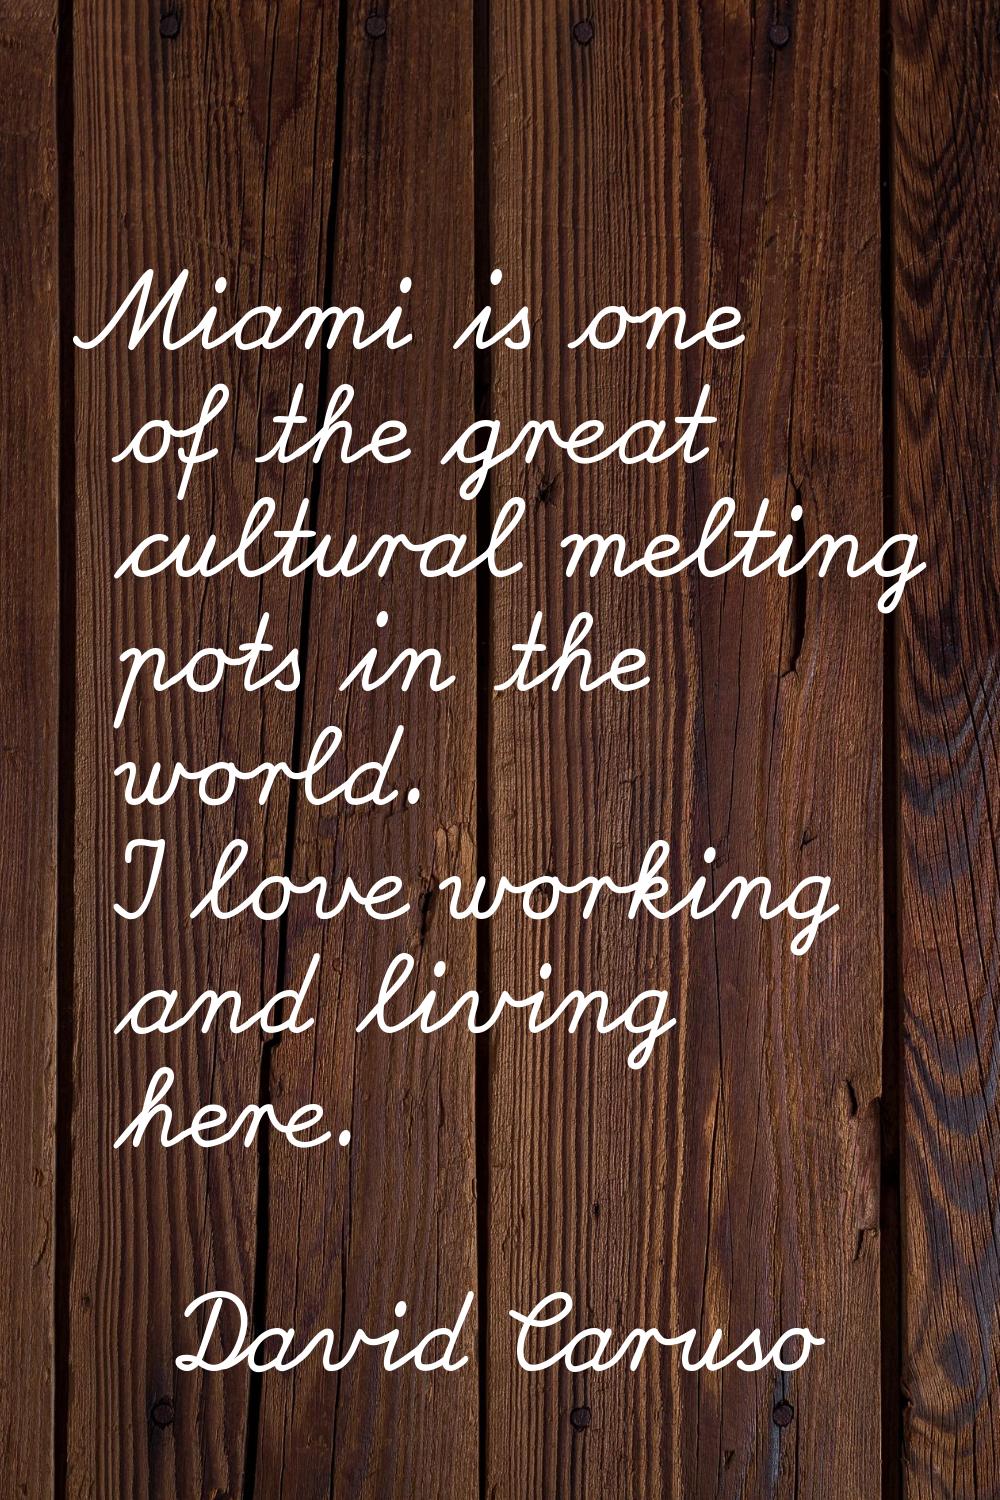 Miami is one of the great cultural melting pots in the world. I love working and living here.